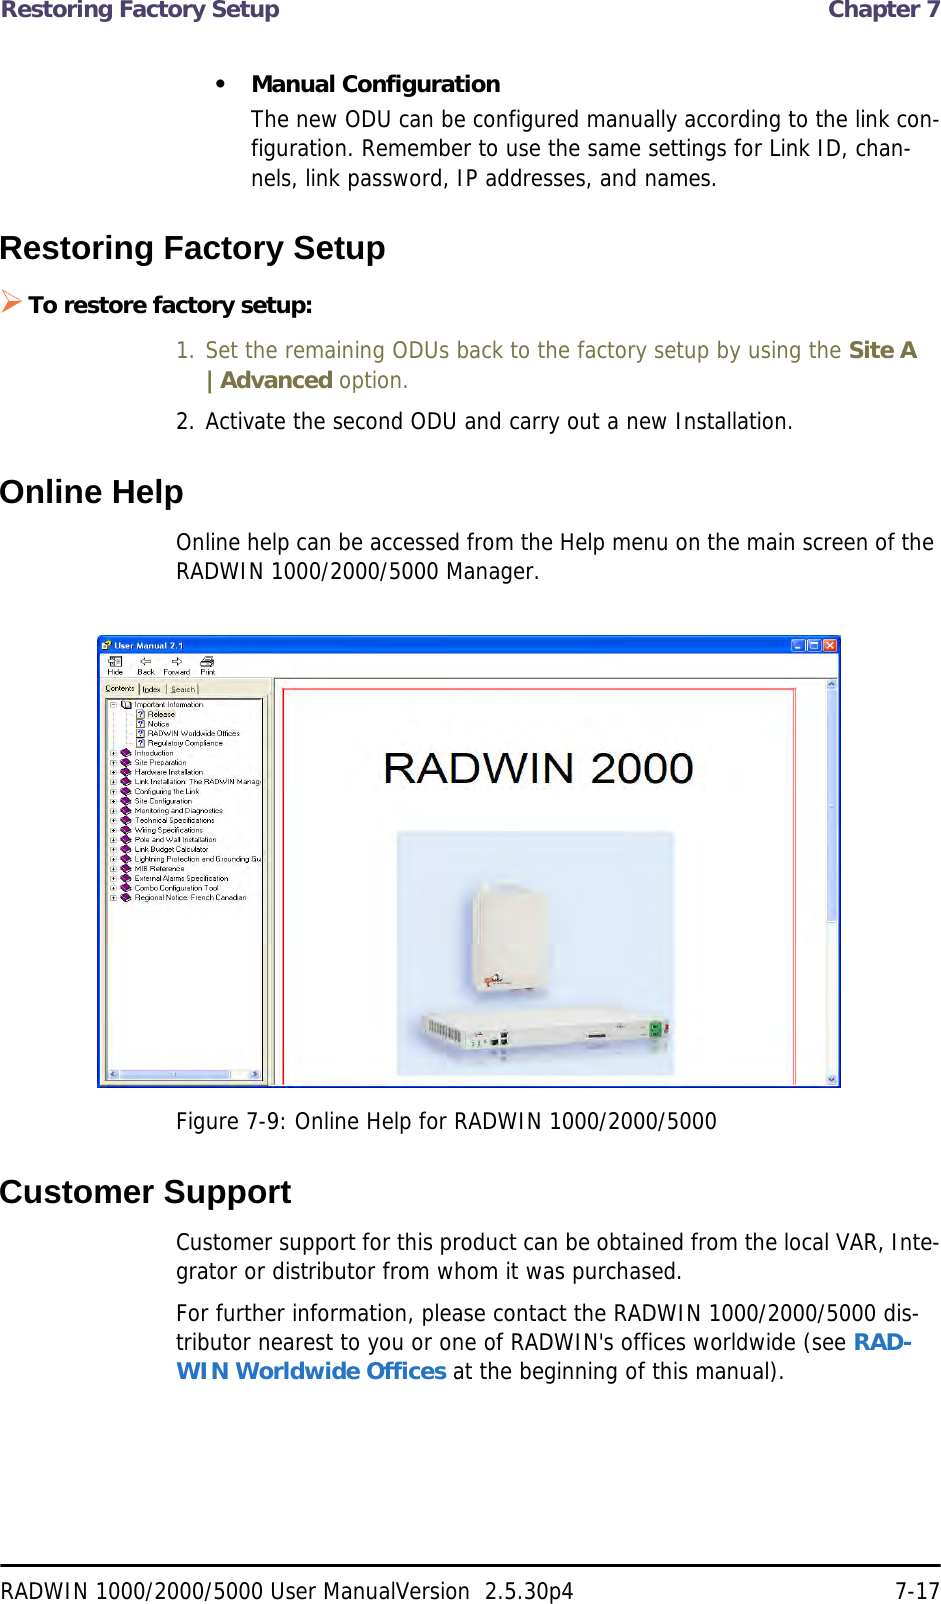 Restoring Factory Setup  Chapter 7RADWIN 1000/2000/5000 User ManualVersion  2.5.30p4 7-17• Manual ConfigurationThe new ODU can be configured manually according to the link con-figuration. Remember to use the same settings for Link ID, chan-nels, link password, IP addresses, and names. Restoring Factory SetupTo restore factory setup:1. Set the remaining ODUs back to the factory setup by using the Site A |Advanced option.2. Activate the second ODU and carry out a new Installation.Online HelpOnline help can be accessed from the Help menu on the main screen of the RADWIN 1000/2000/5000 Manager.Figure 7-9: Online Help for RADWIN 1000/2000/5000Customer SupportCustomer support for this product can be obtained from the local VAR, Inte-grator or distributor from whom it was purchased.For further information, please contact the RADWIN 1000/2000/5000 dis-tributor nearest to you or one of RADWIN&apos;s offices worldwide (see RAD-WIN Worldwide Offices at the beginning of this manual).